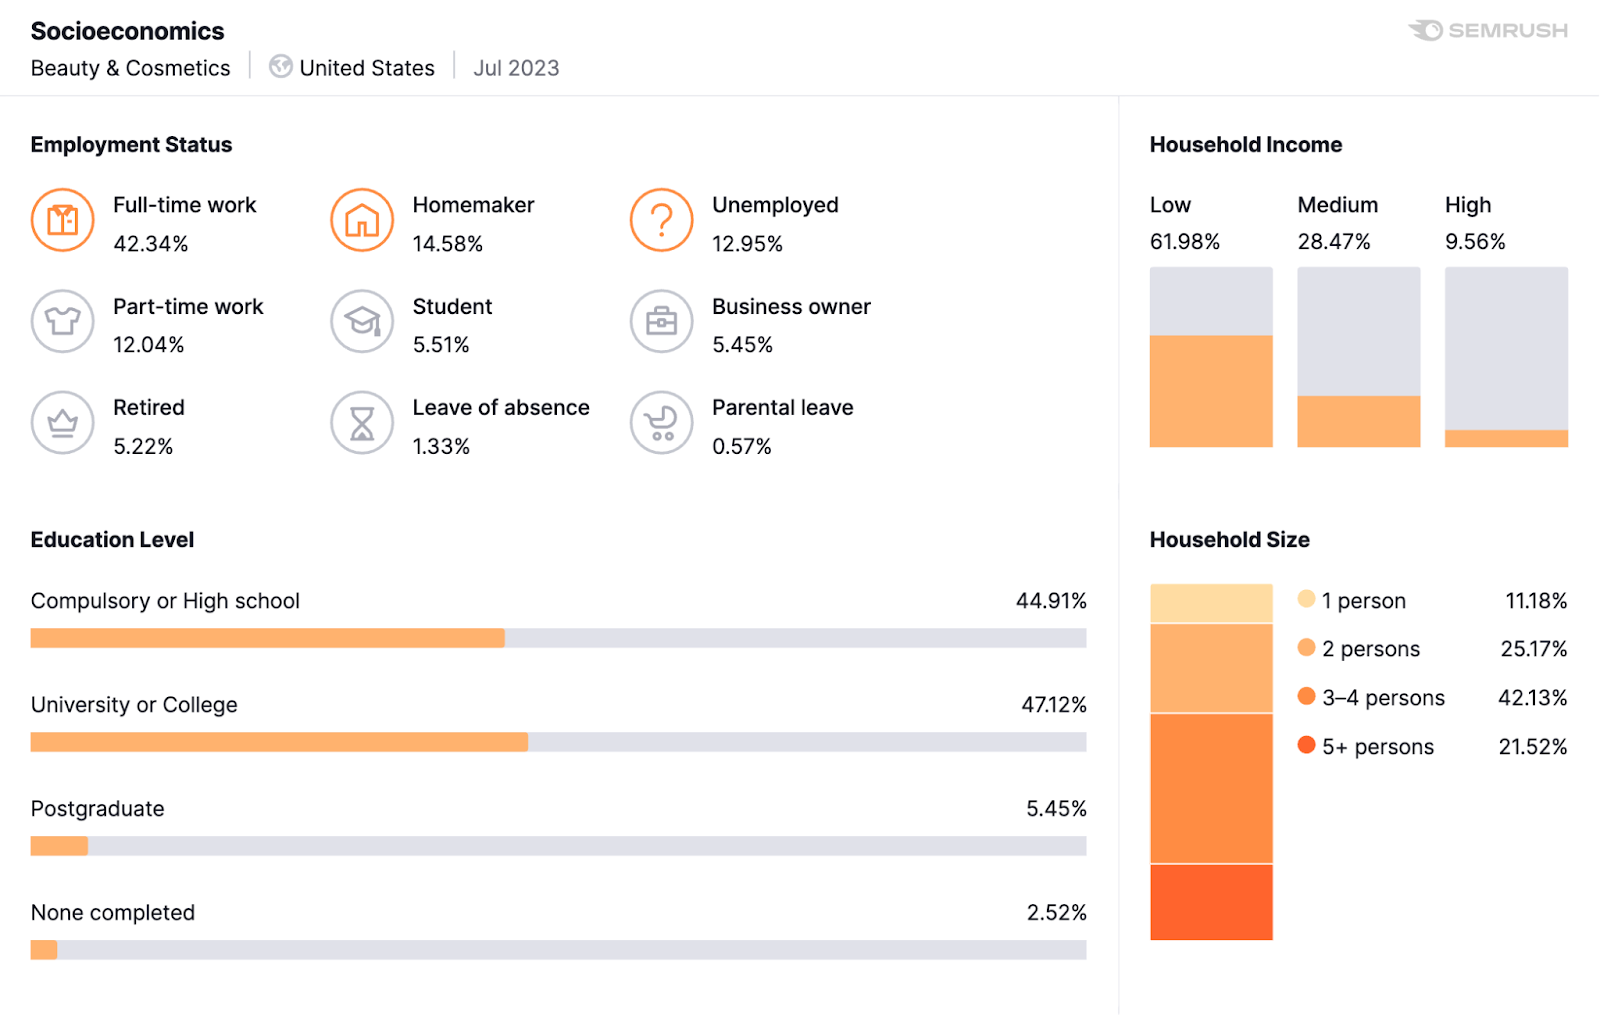 "Socioeconomics" section in Market Explorer with audience employment status, education level, household income and size